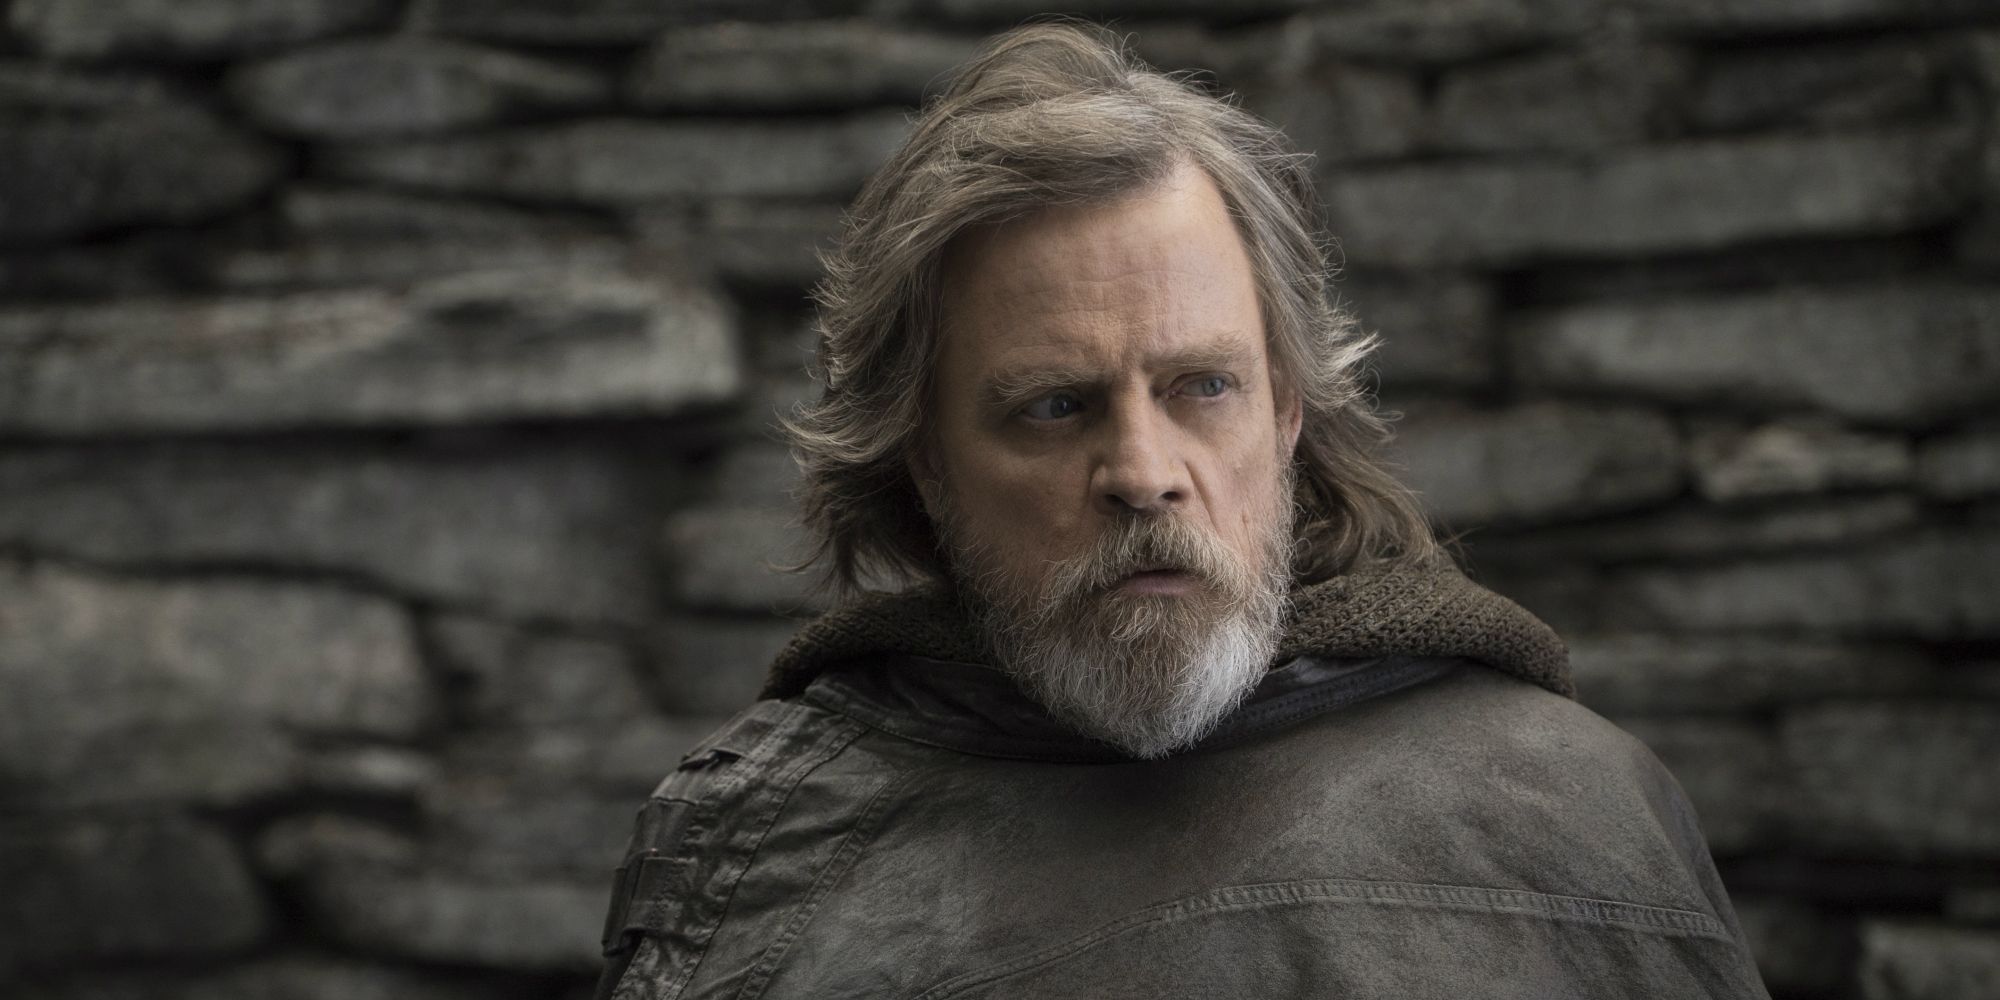 Star Wars’ Mark Hamill Is Deleting His Facebook Page Over Political Ads Controversy